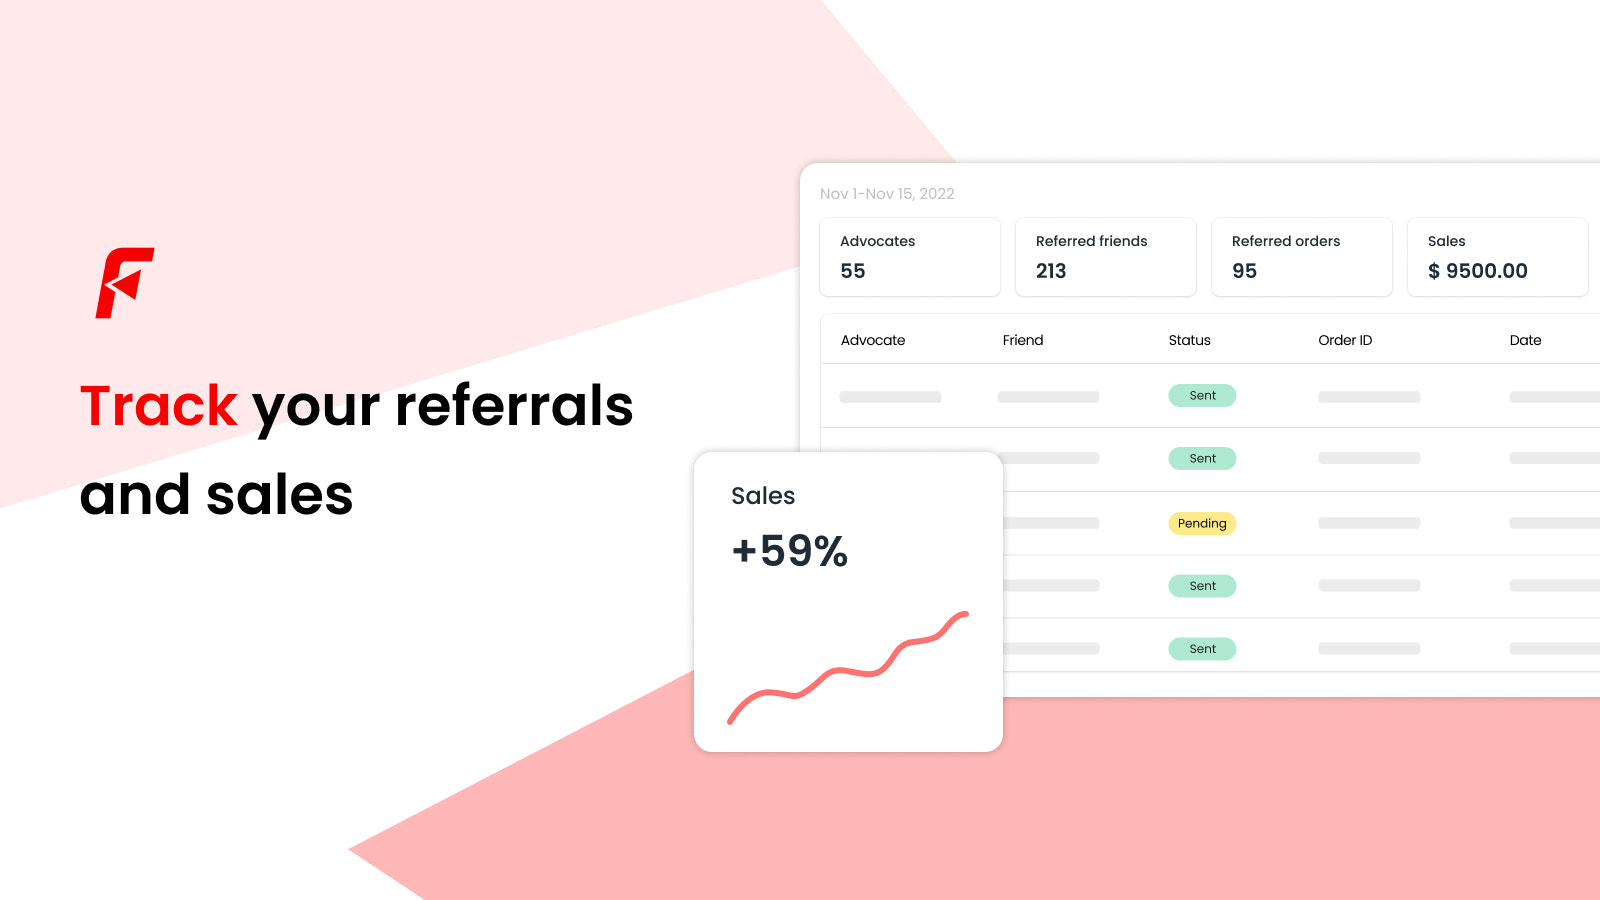 Track your referrals and sales